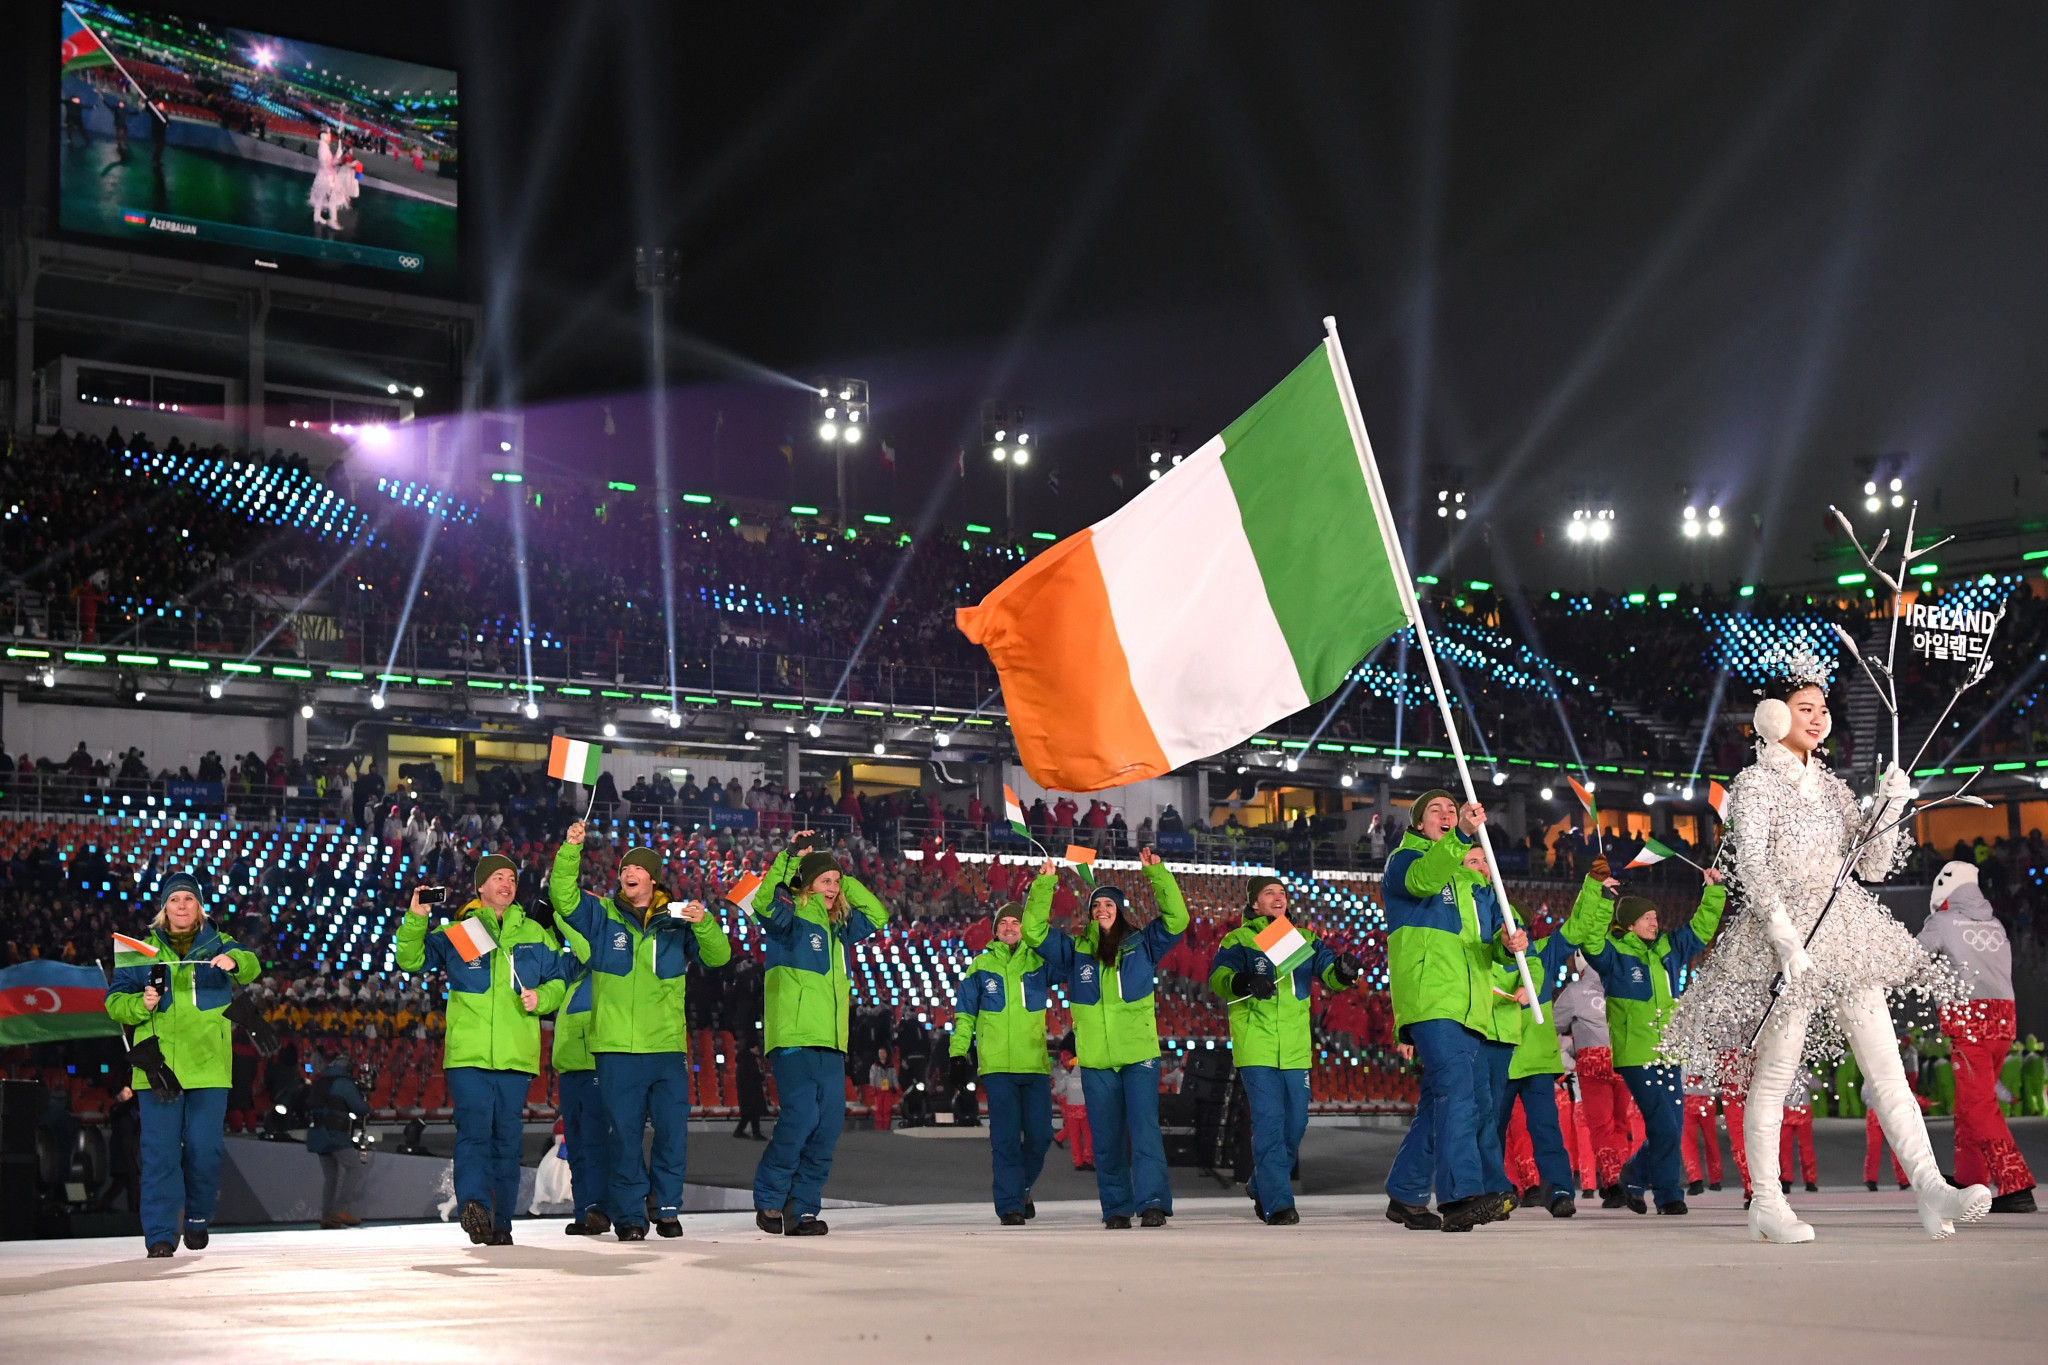 Olympic Federation of Ireland appoint performance support leads for Tokyo 2020